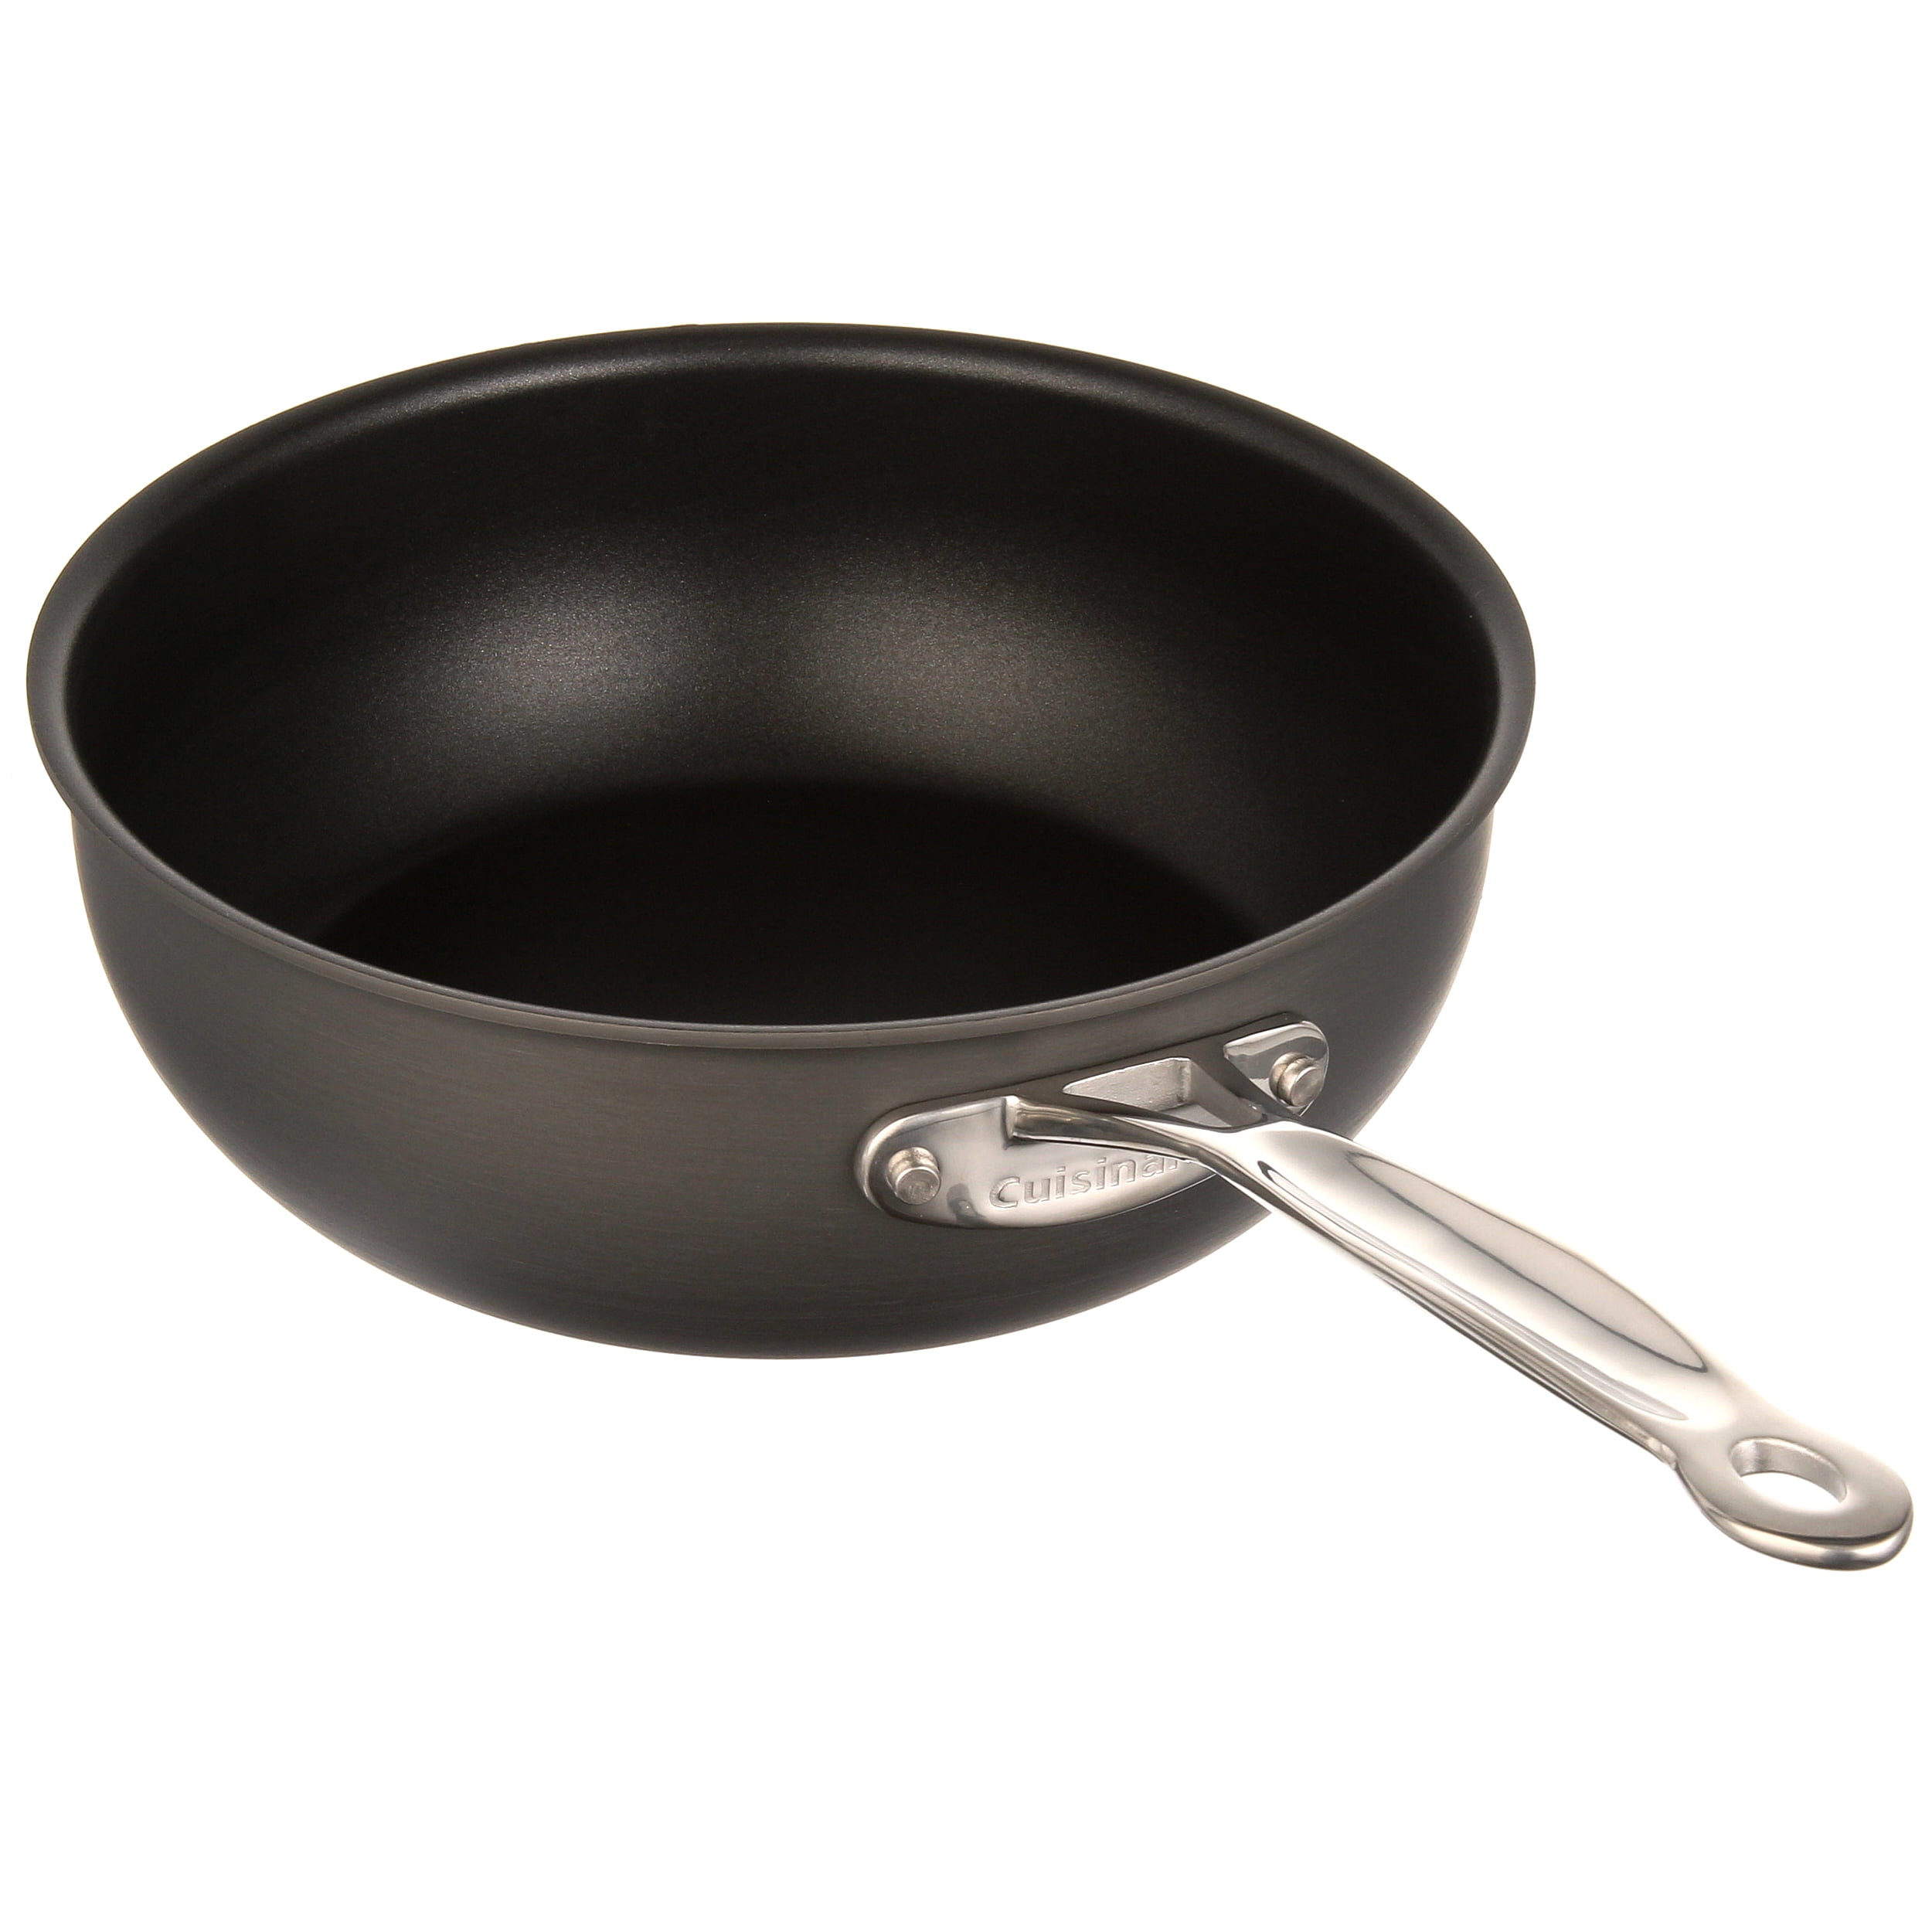 Chef's Classic 3 Qt. Covered Saucepan - SANE - Sewing and Housewares